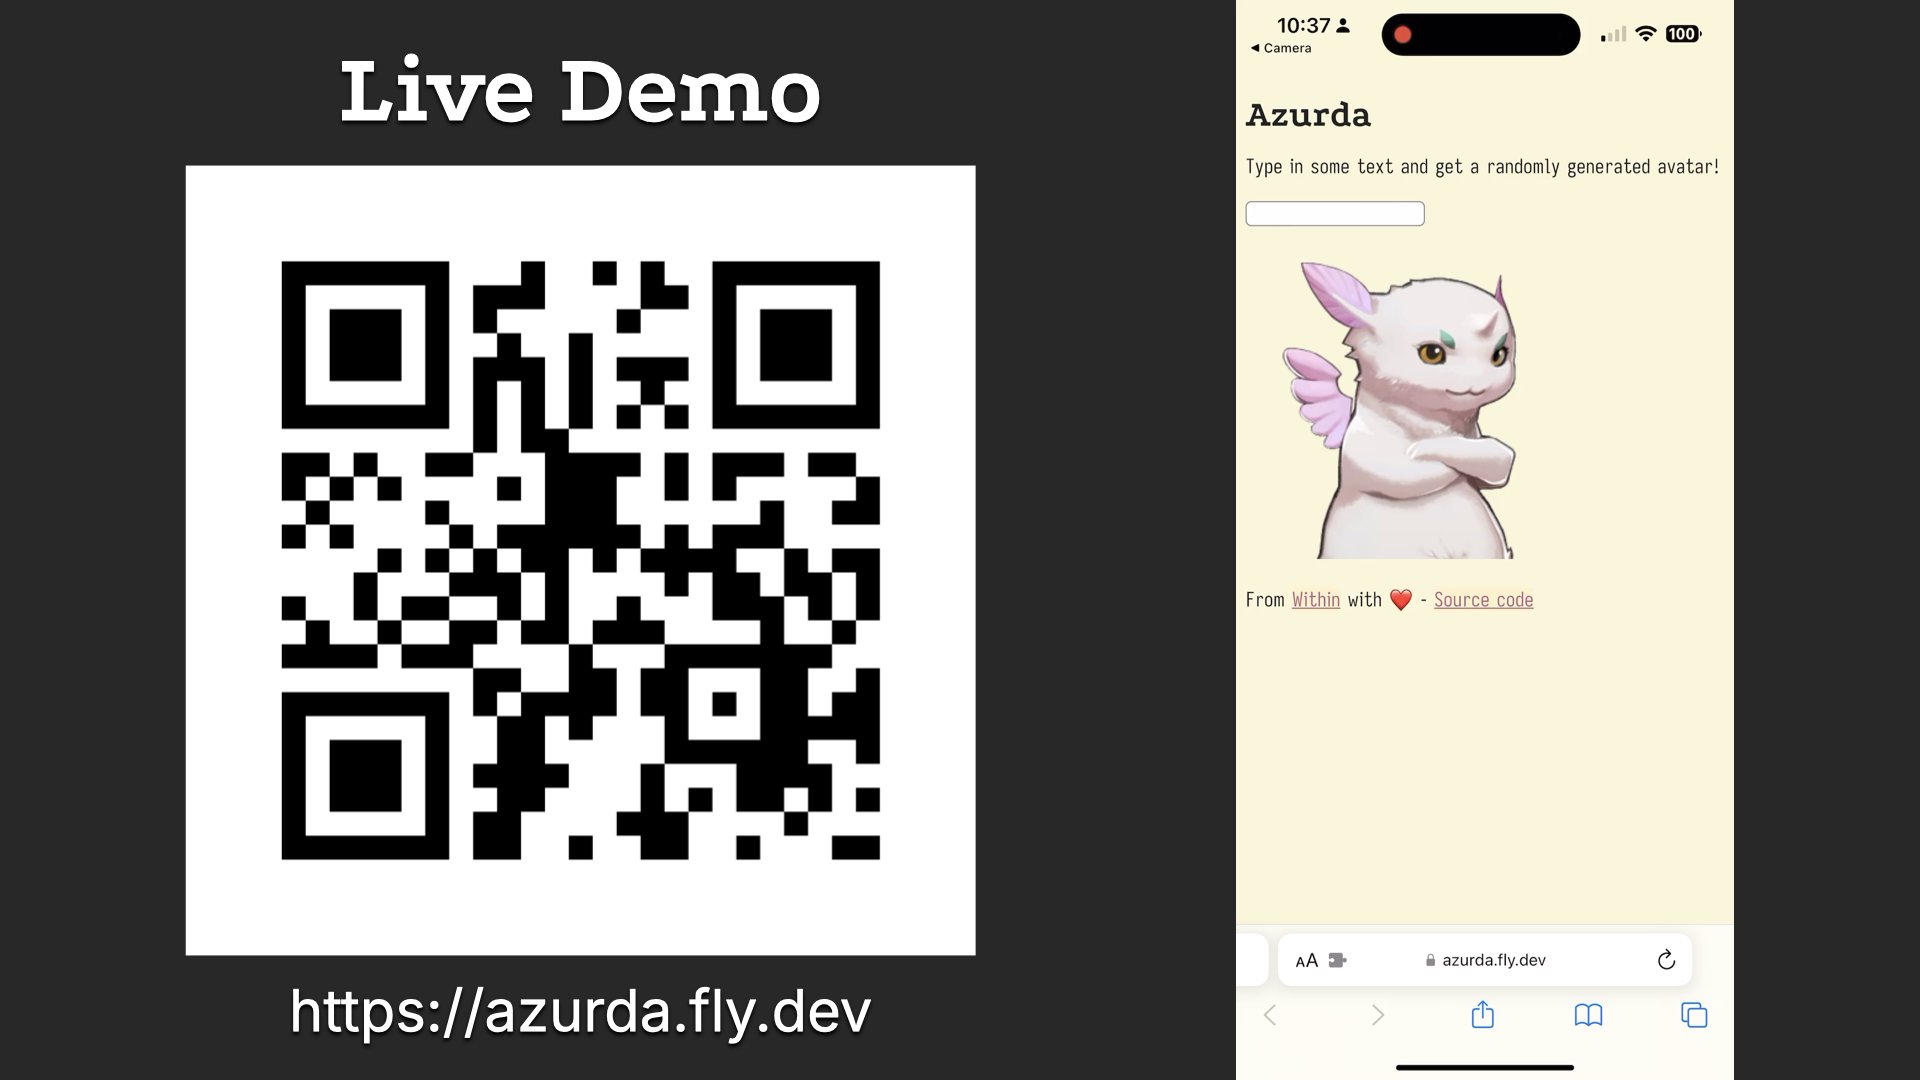 A link to the live demo and a QR code. The video version has an animated preview.